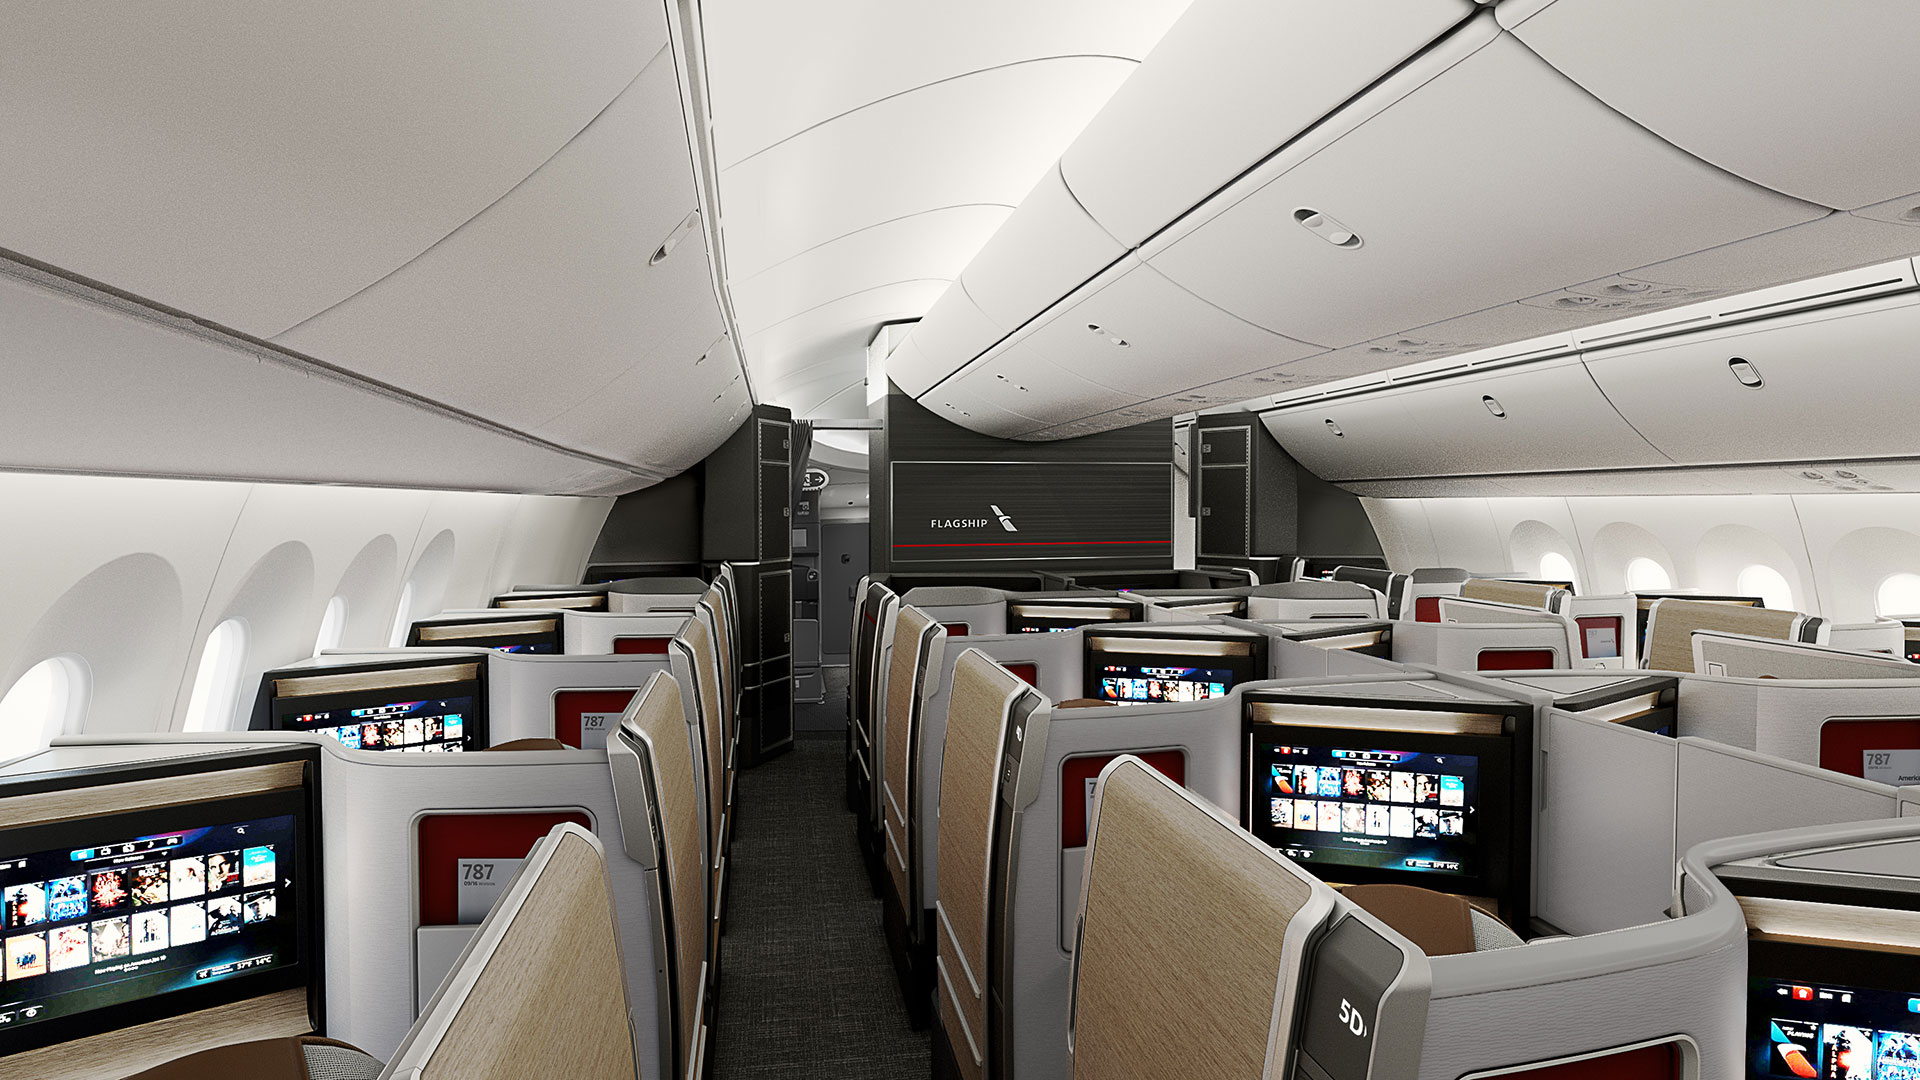 The Boeing 787-9 will have 51 seats in the Flagship wing, 21 more than the current Boeing 787-9 that America has in its fleet.